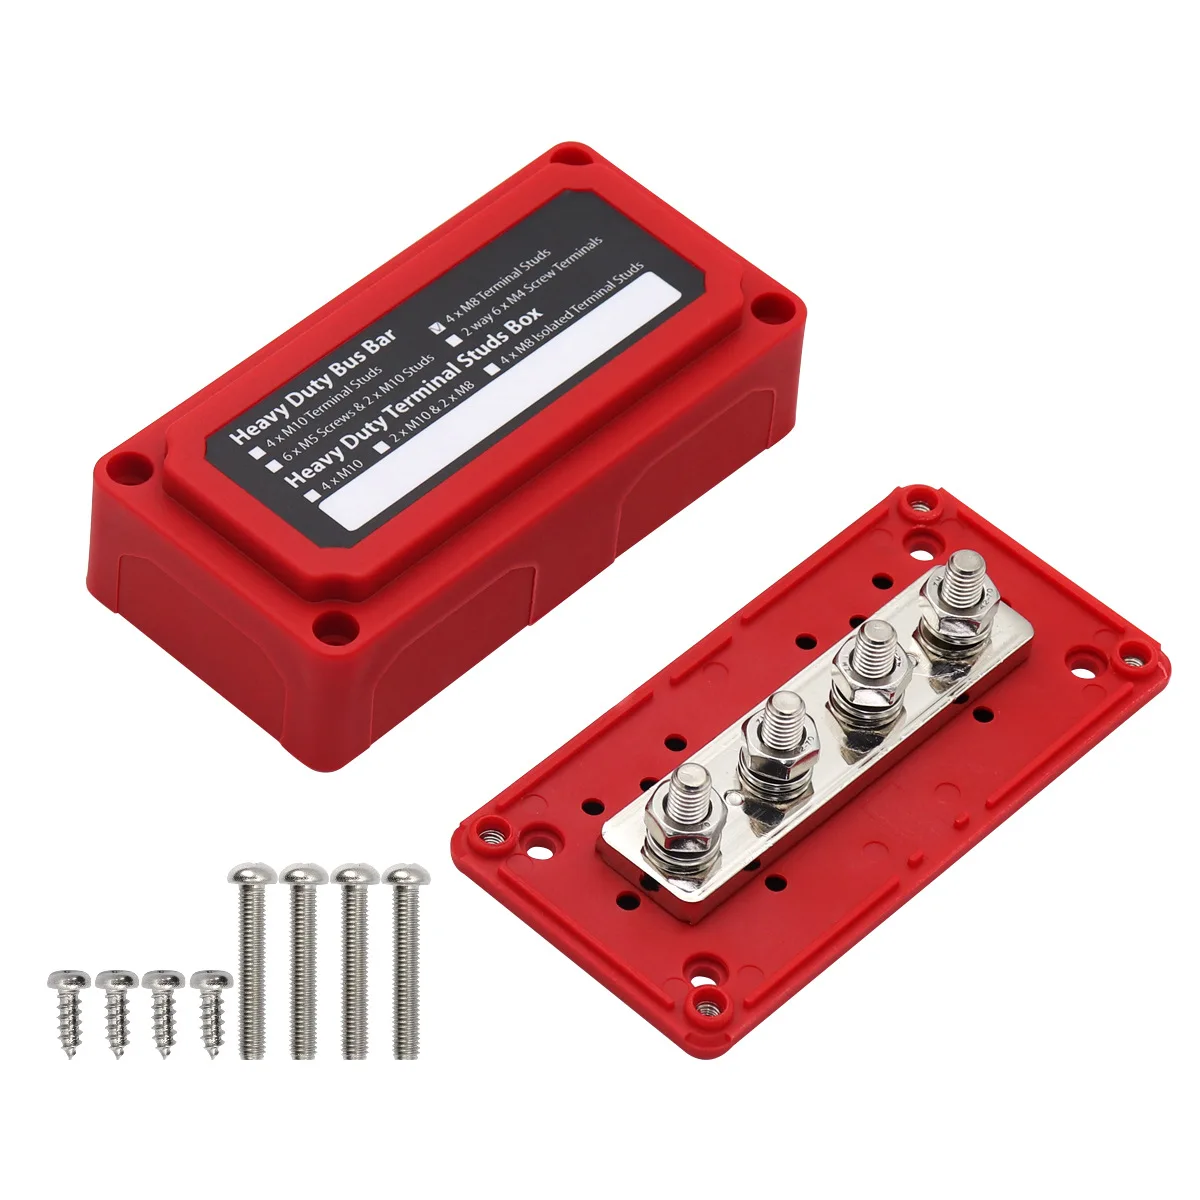 

New Red Shell Bus Bar Box M8 Specification 300A High Current 48V RV Bus Bar Suitable for 12-48V Cars Ships